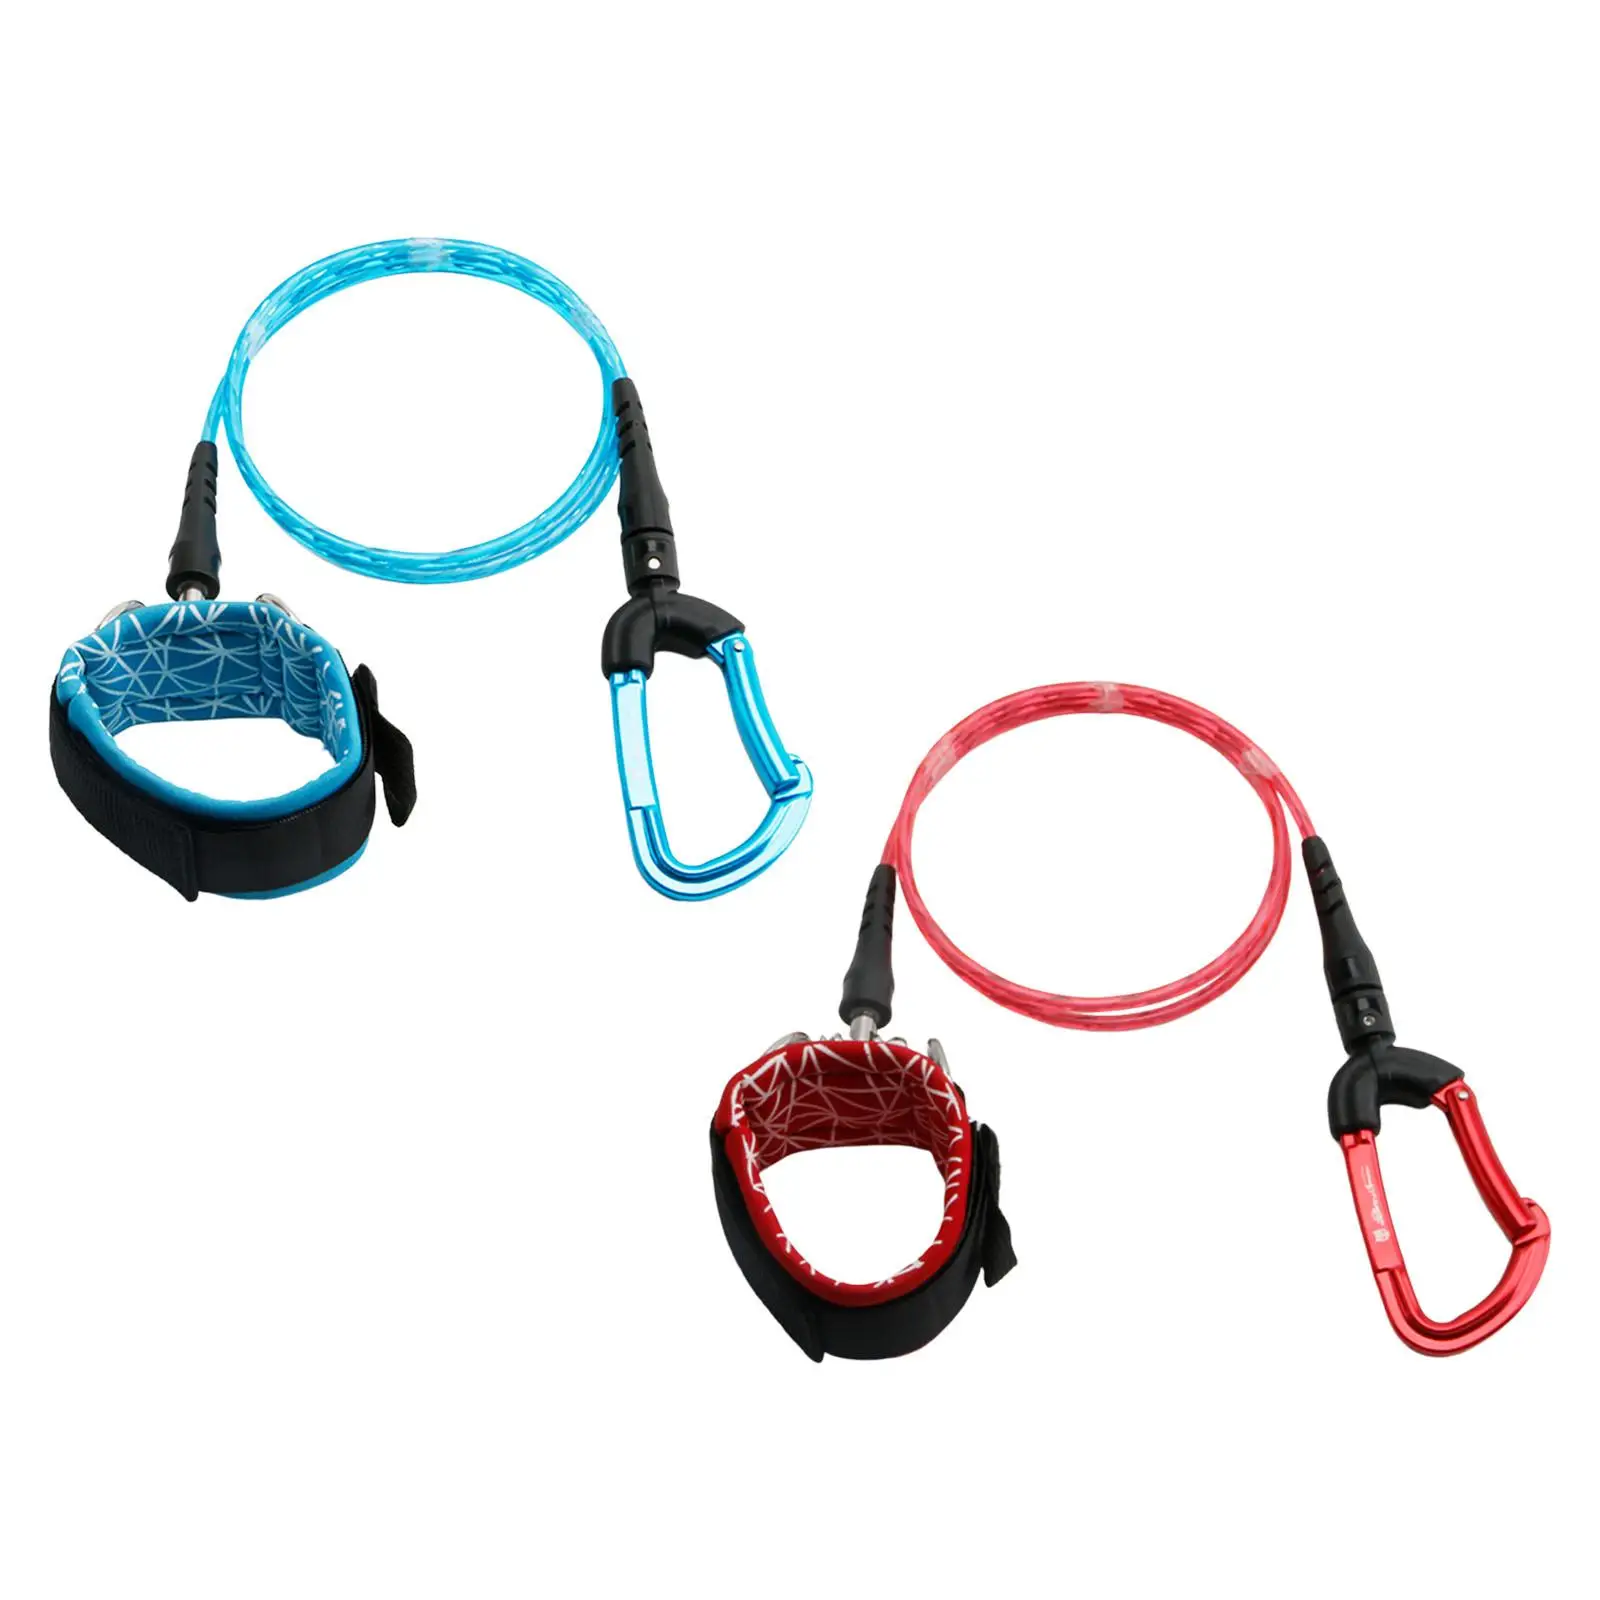 Freediving Lanyard Professional Adjustable Rope for Diving